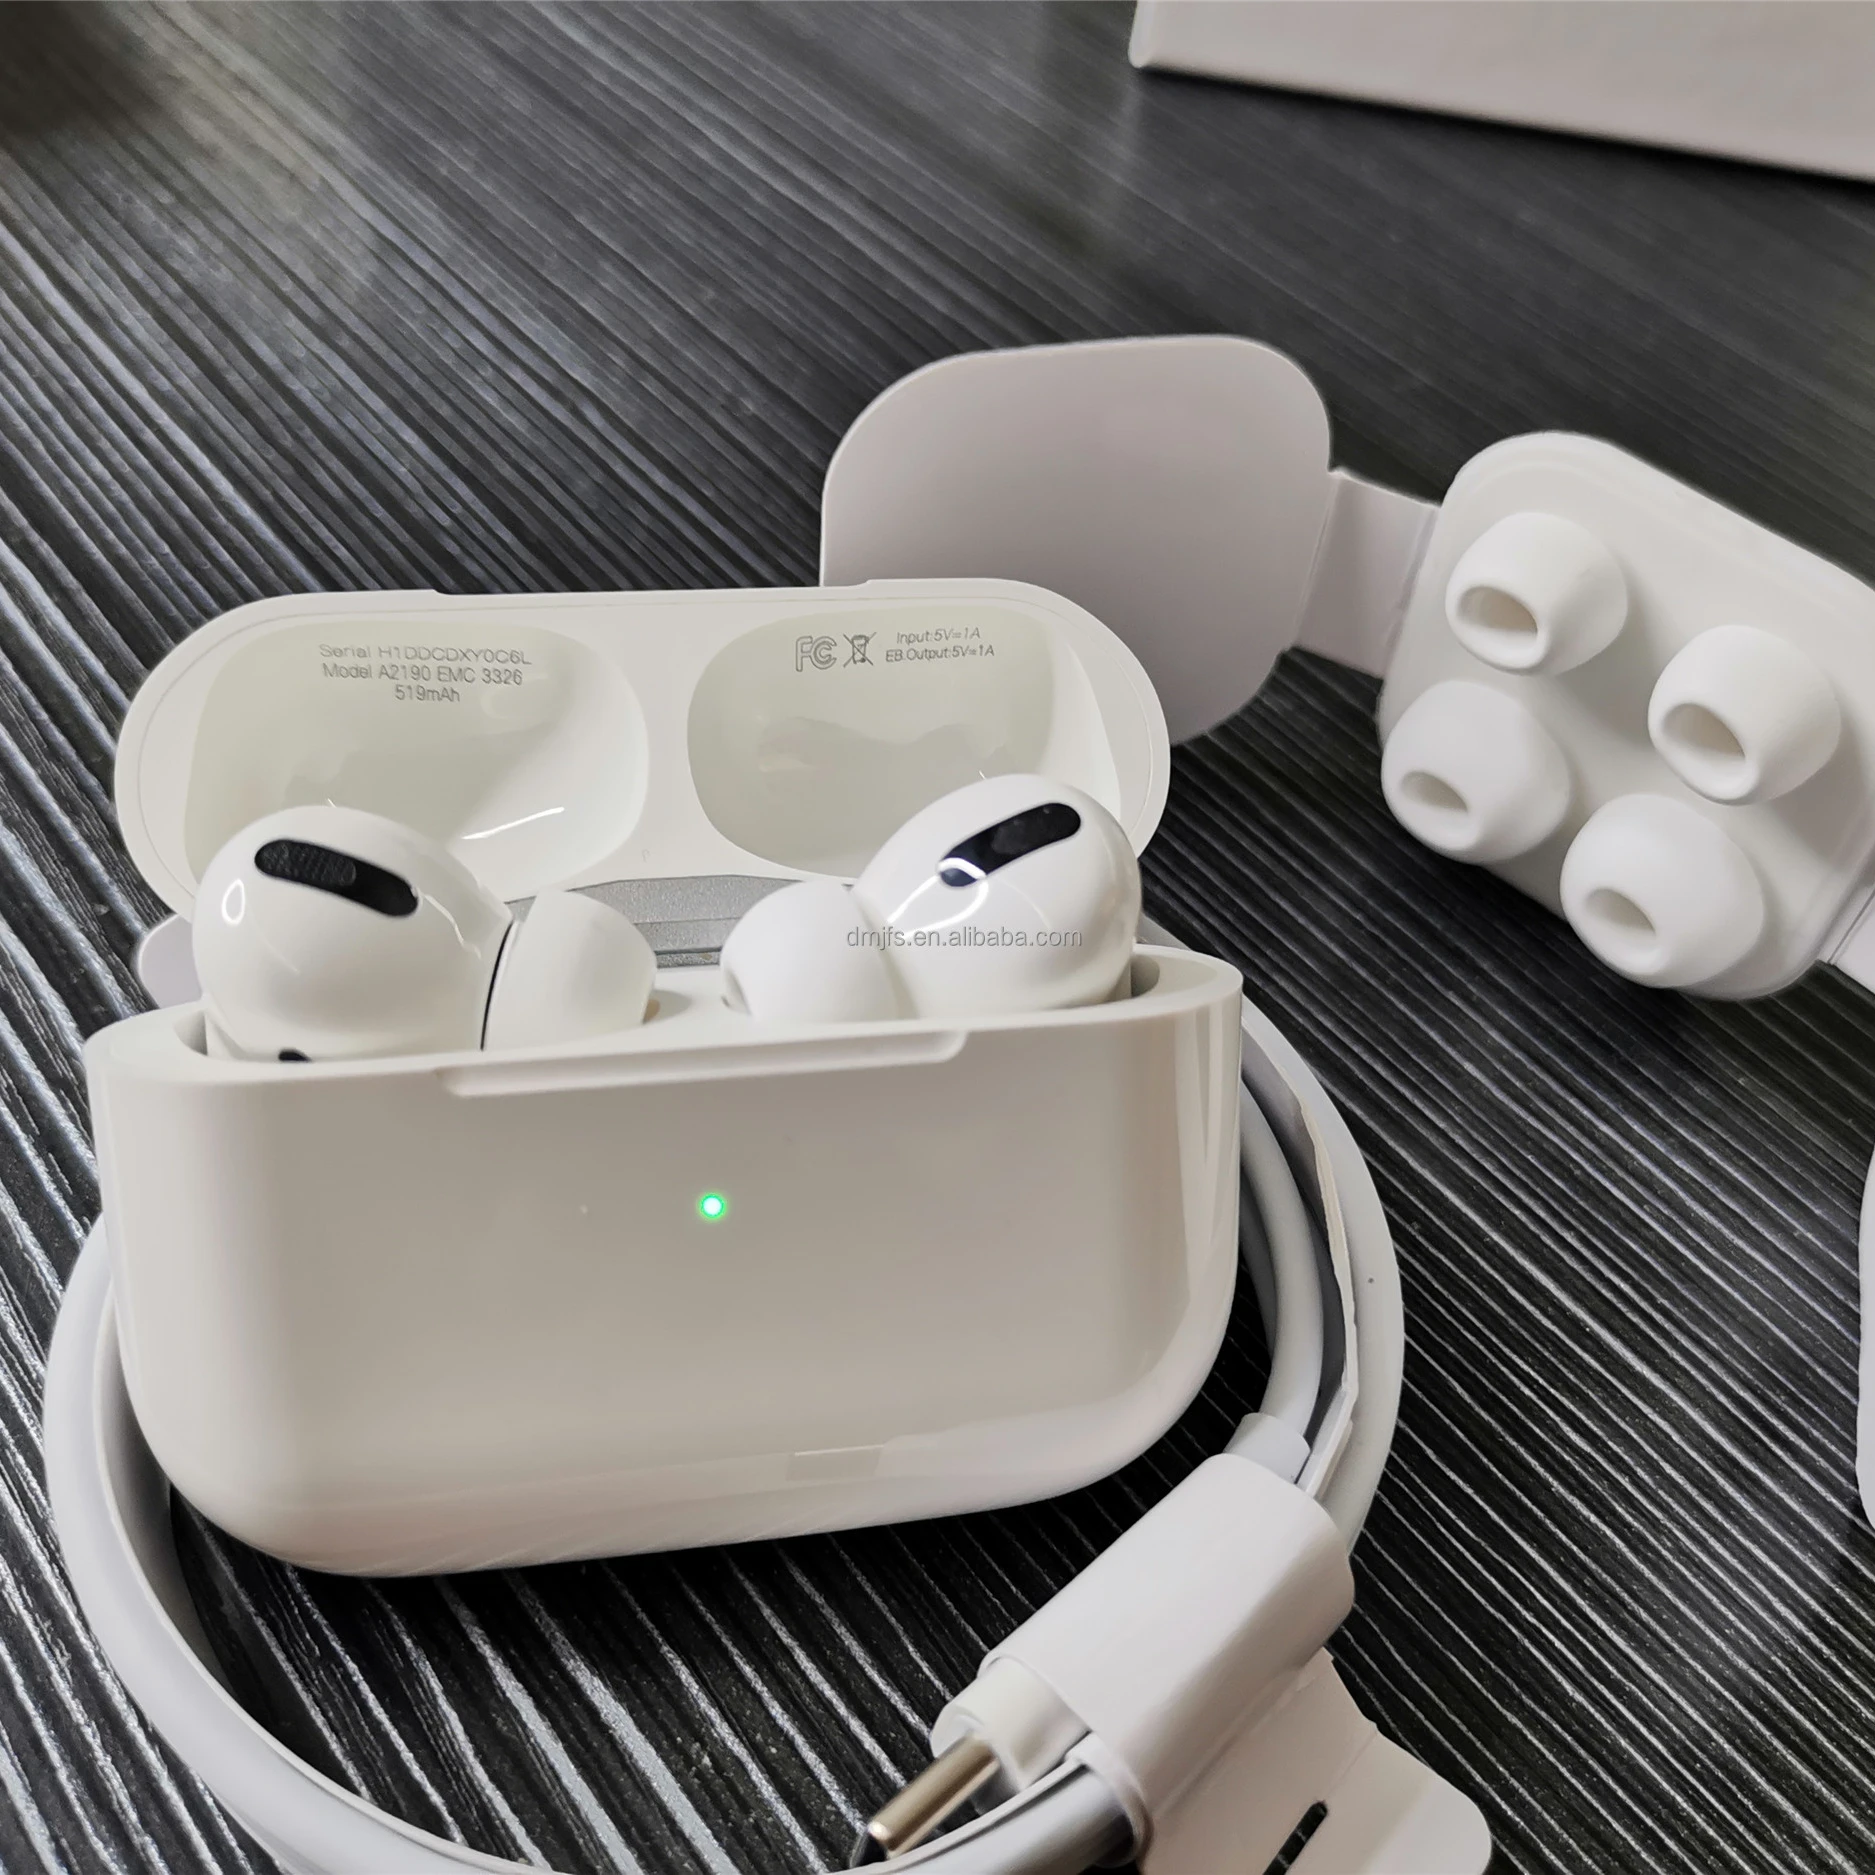 

Top Quality Valid serial number GPS Rename 1:1 jerry ANC airoha 1562A Air 2 Bluetoo/thes Wireless Earbuds For air pro 3, White